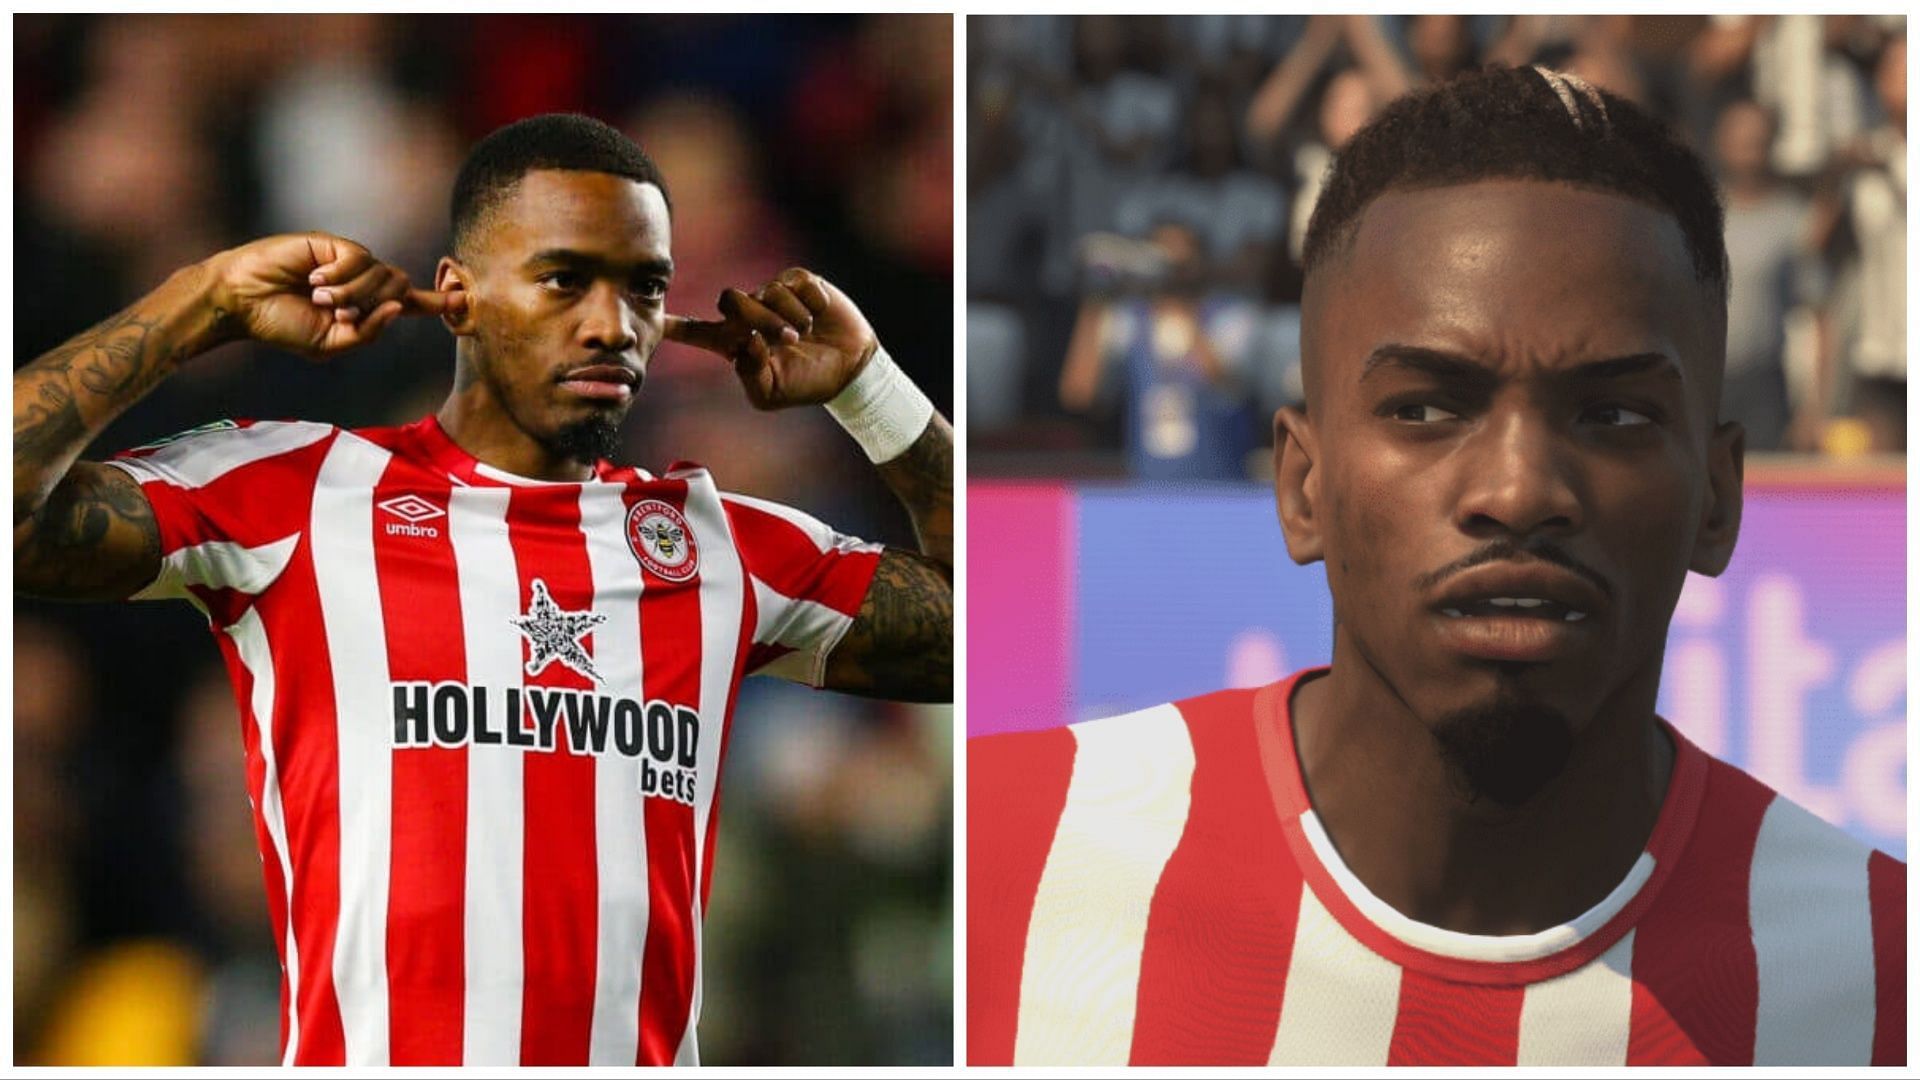 Toney has been removed from FIFA (Images via Getty and EA Sports)